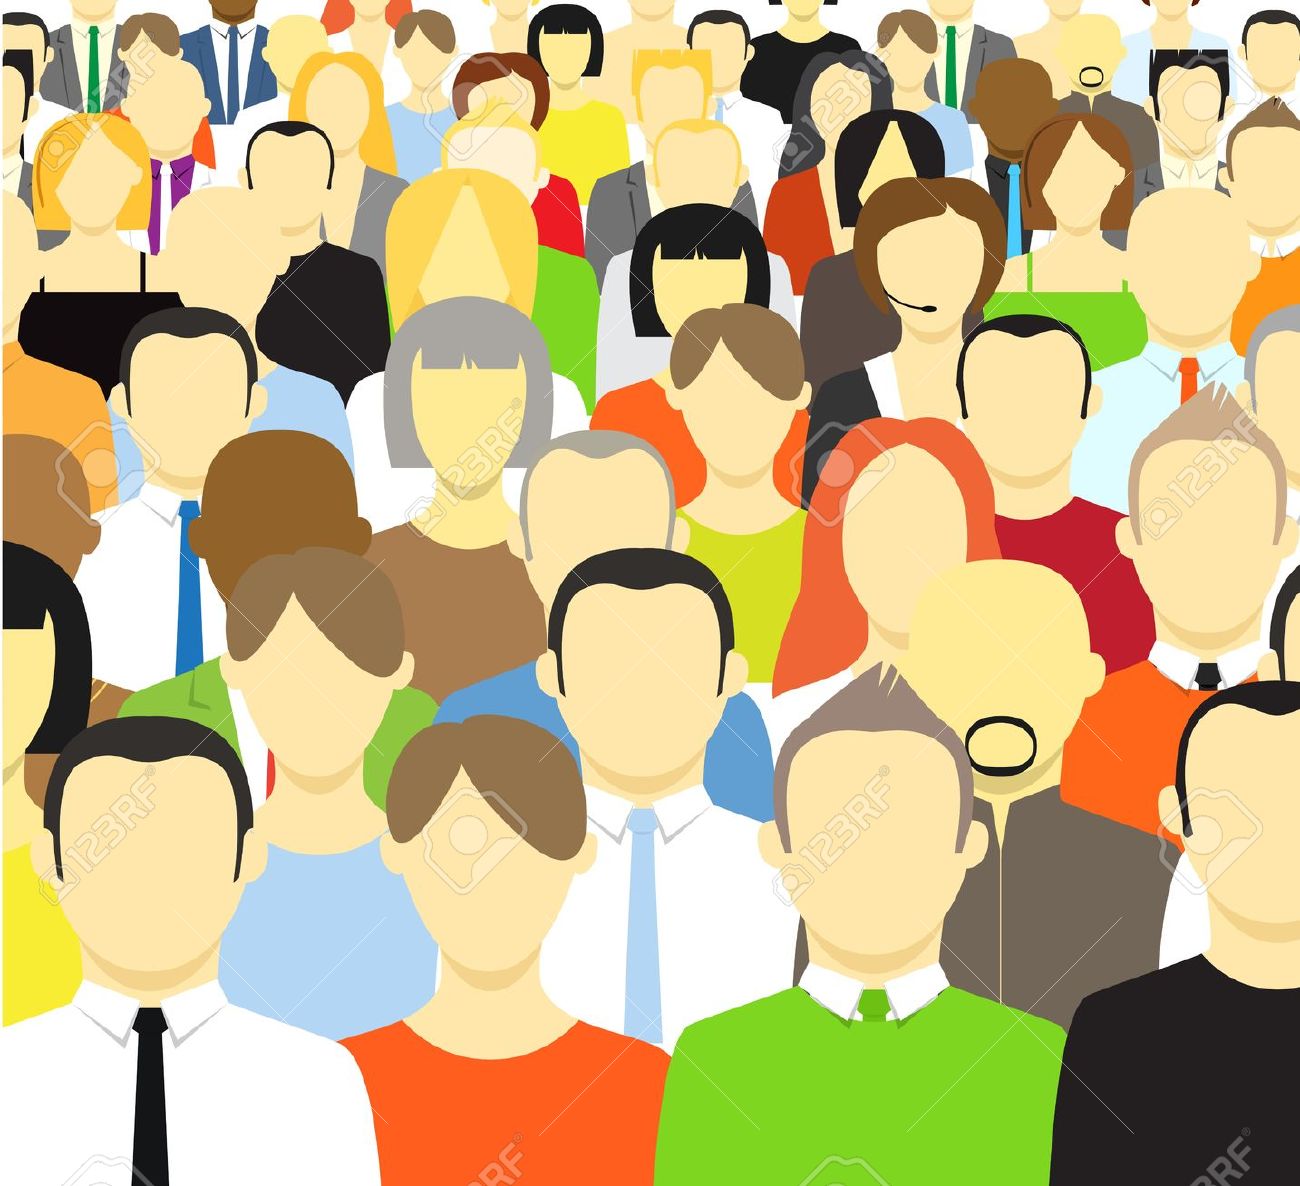 Crowd Image Free Clipart